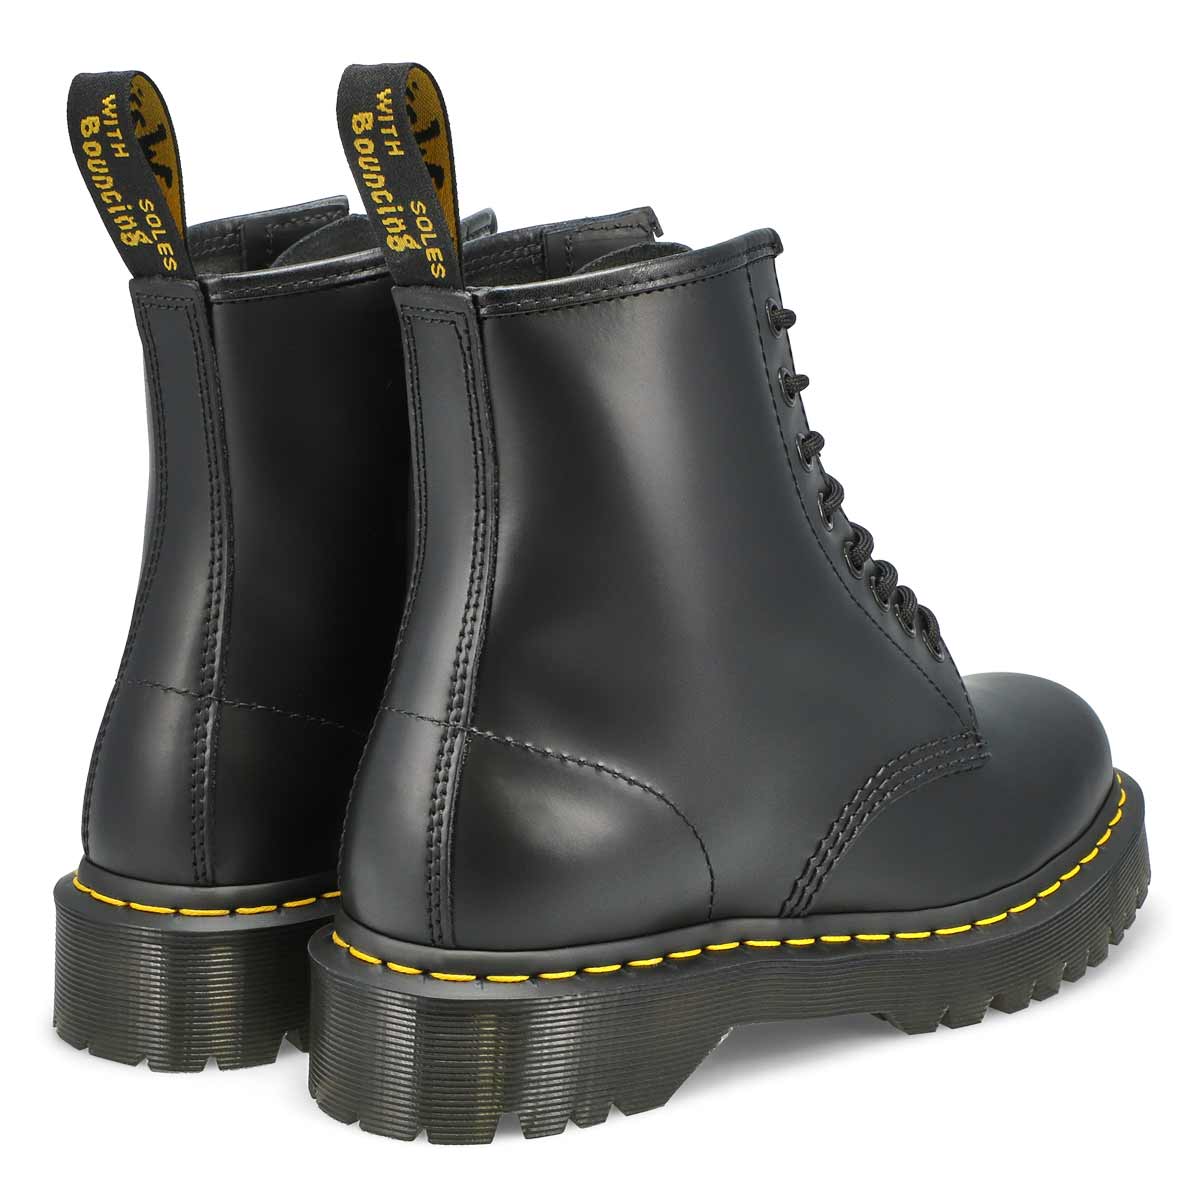 Dr Martens Women's 1460 Bex 8 Eye Leather Boo | SoftMoc.com